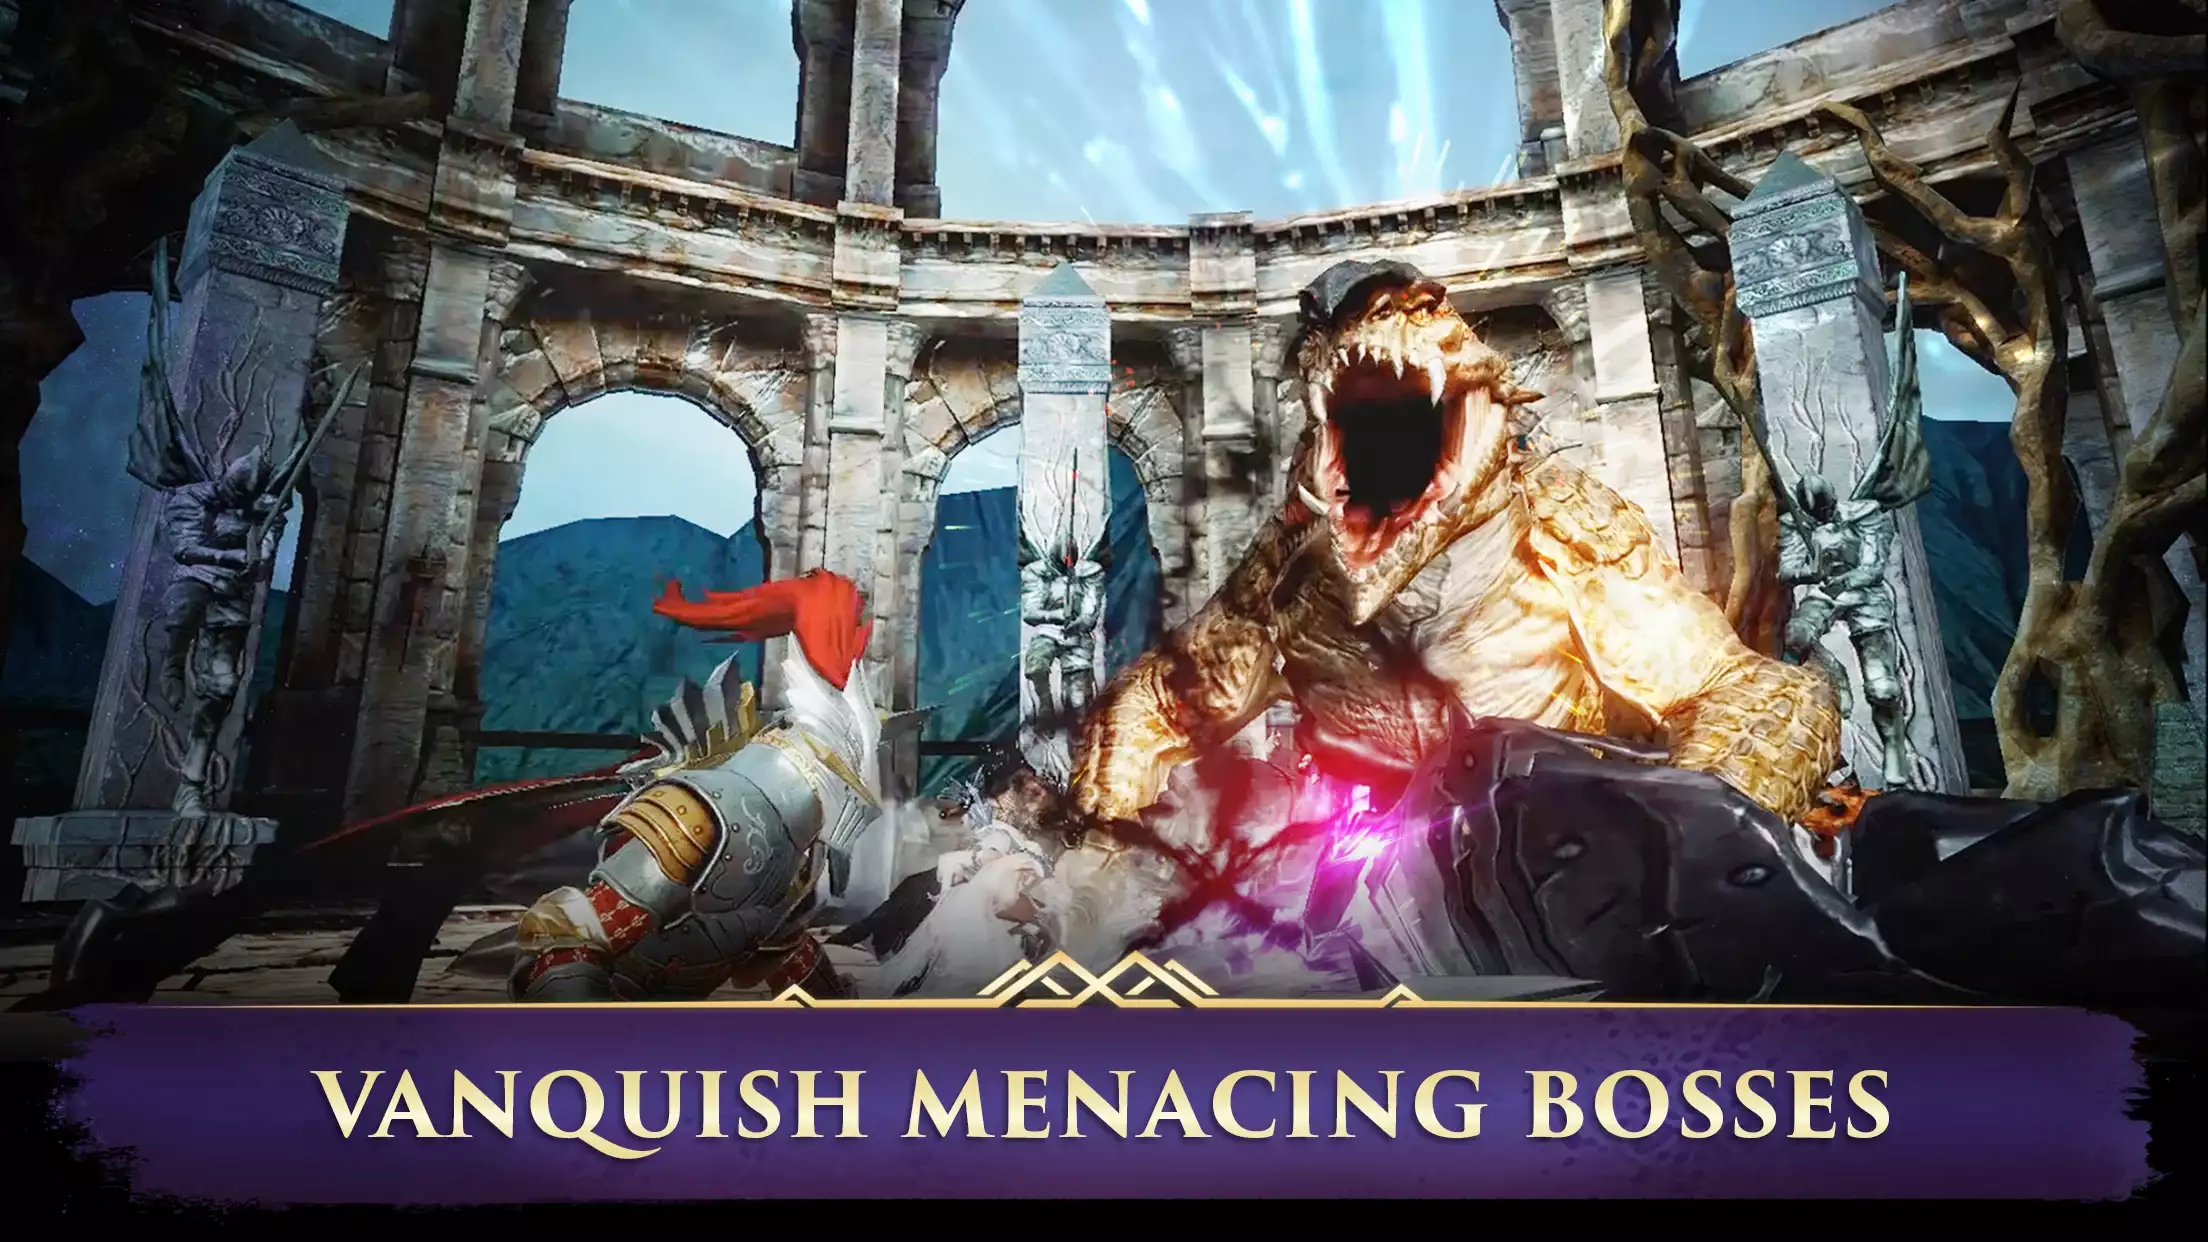 Get an advantage against the enemies in Darkness Rises with the rewards.